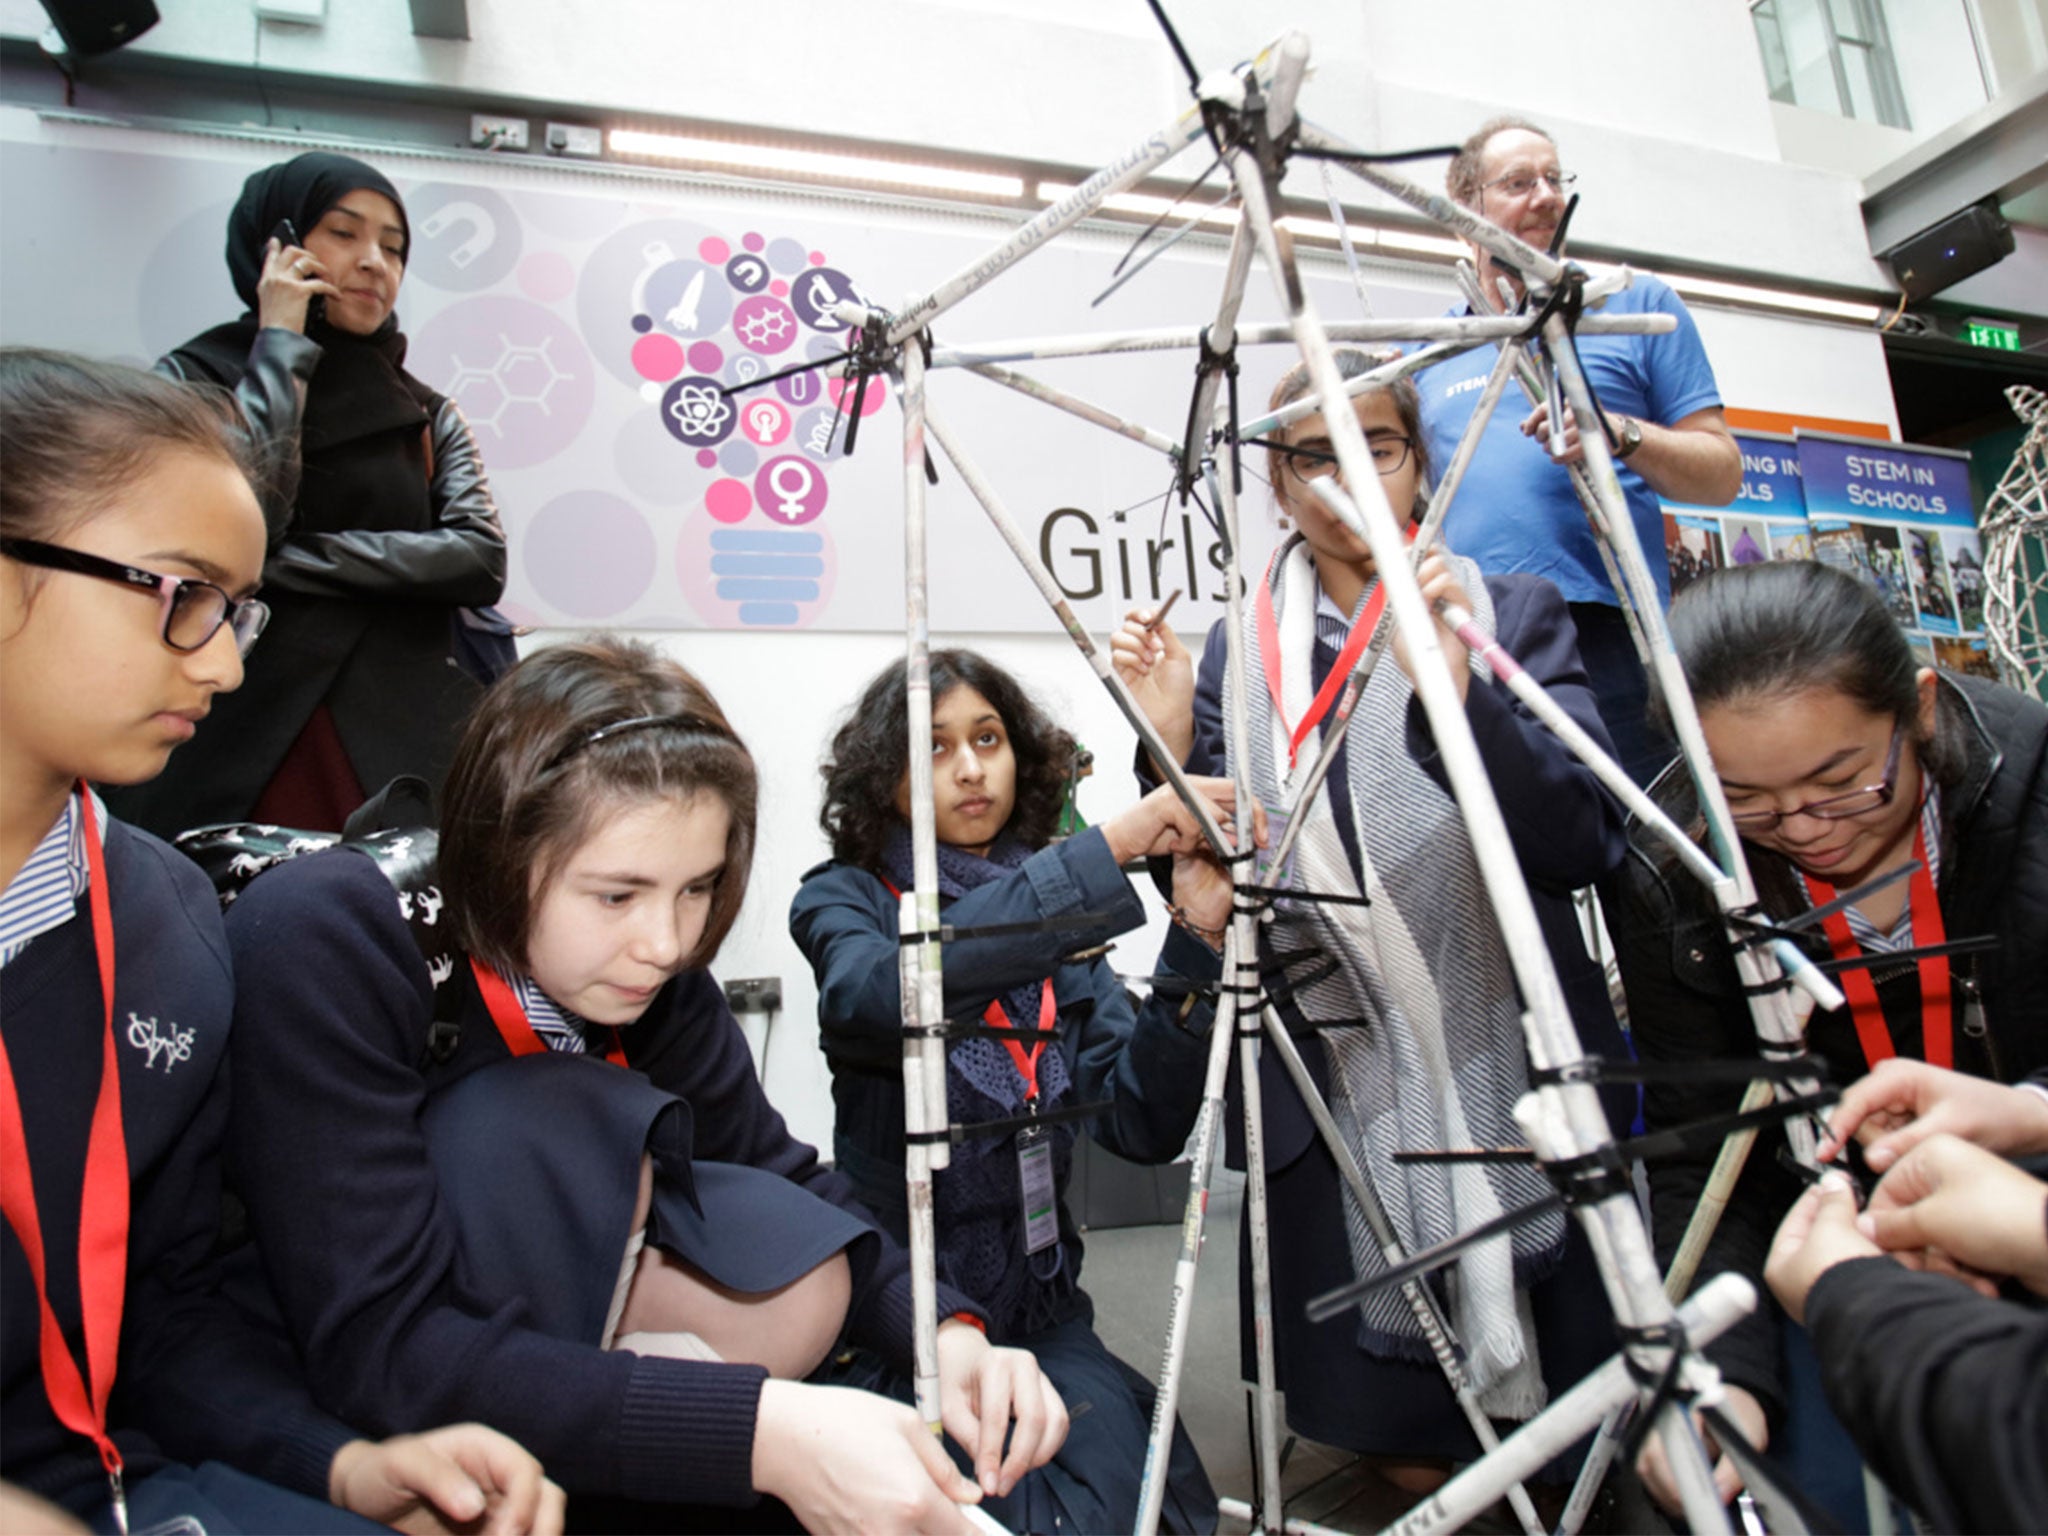 Less than a third of girls aged 11-14 describe STEM subjects as fun and enjoyable